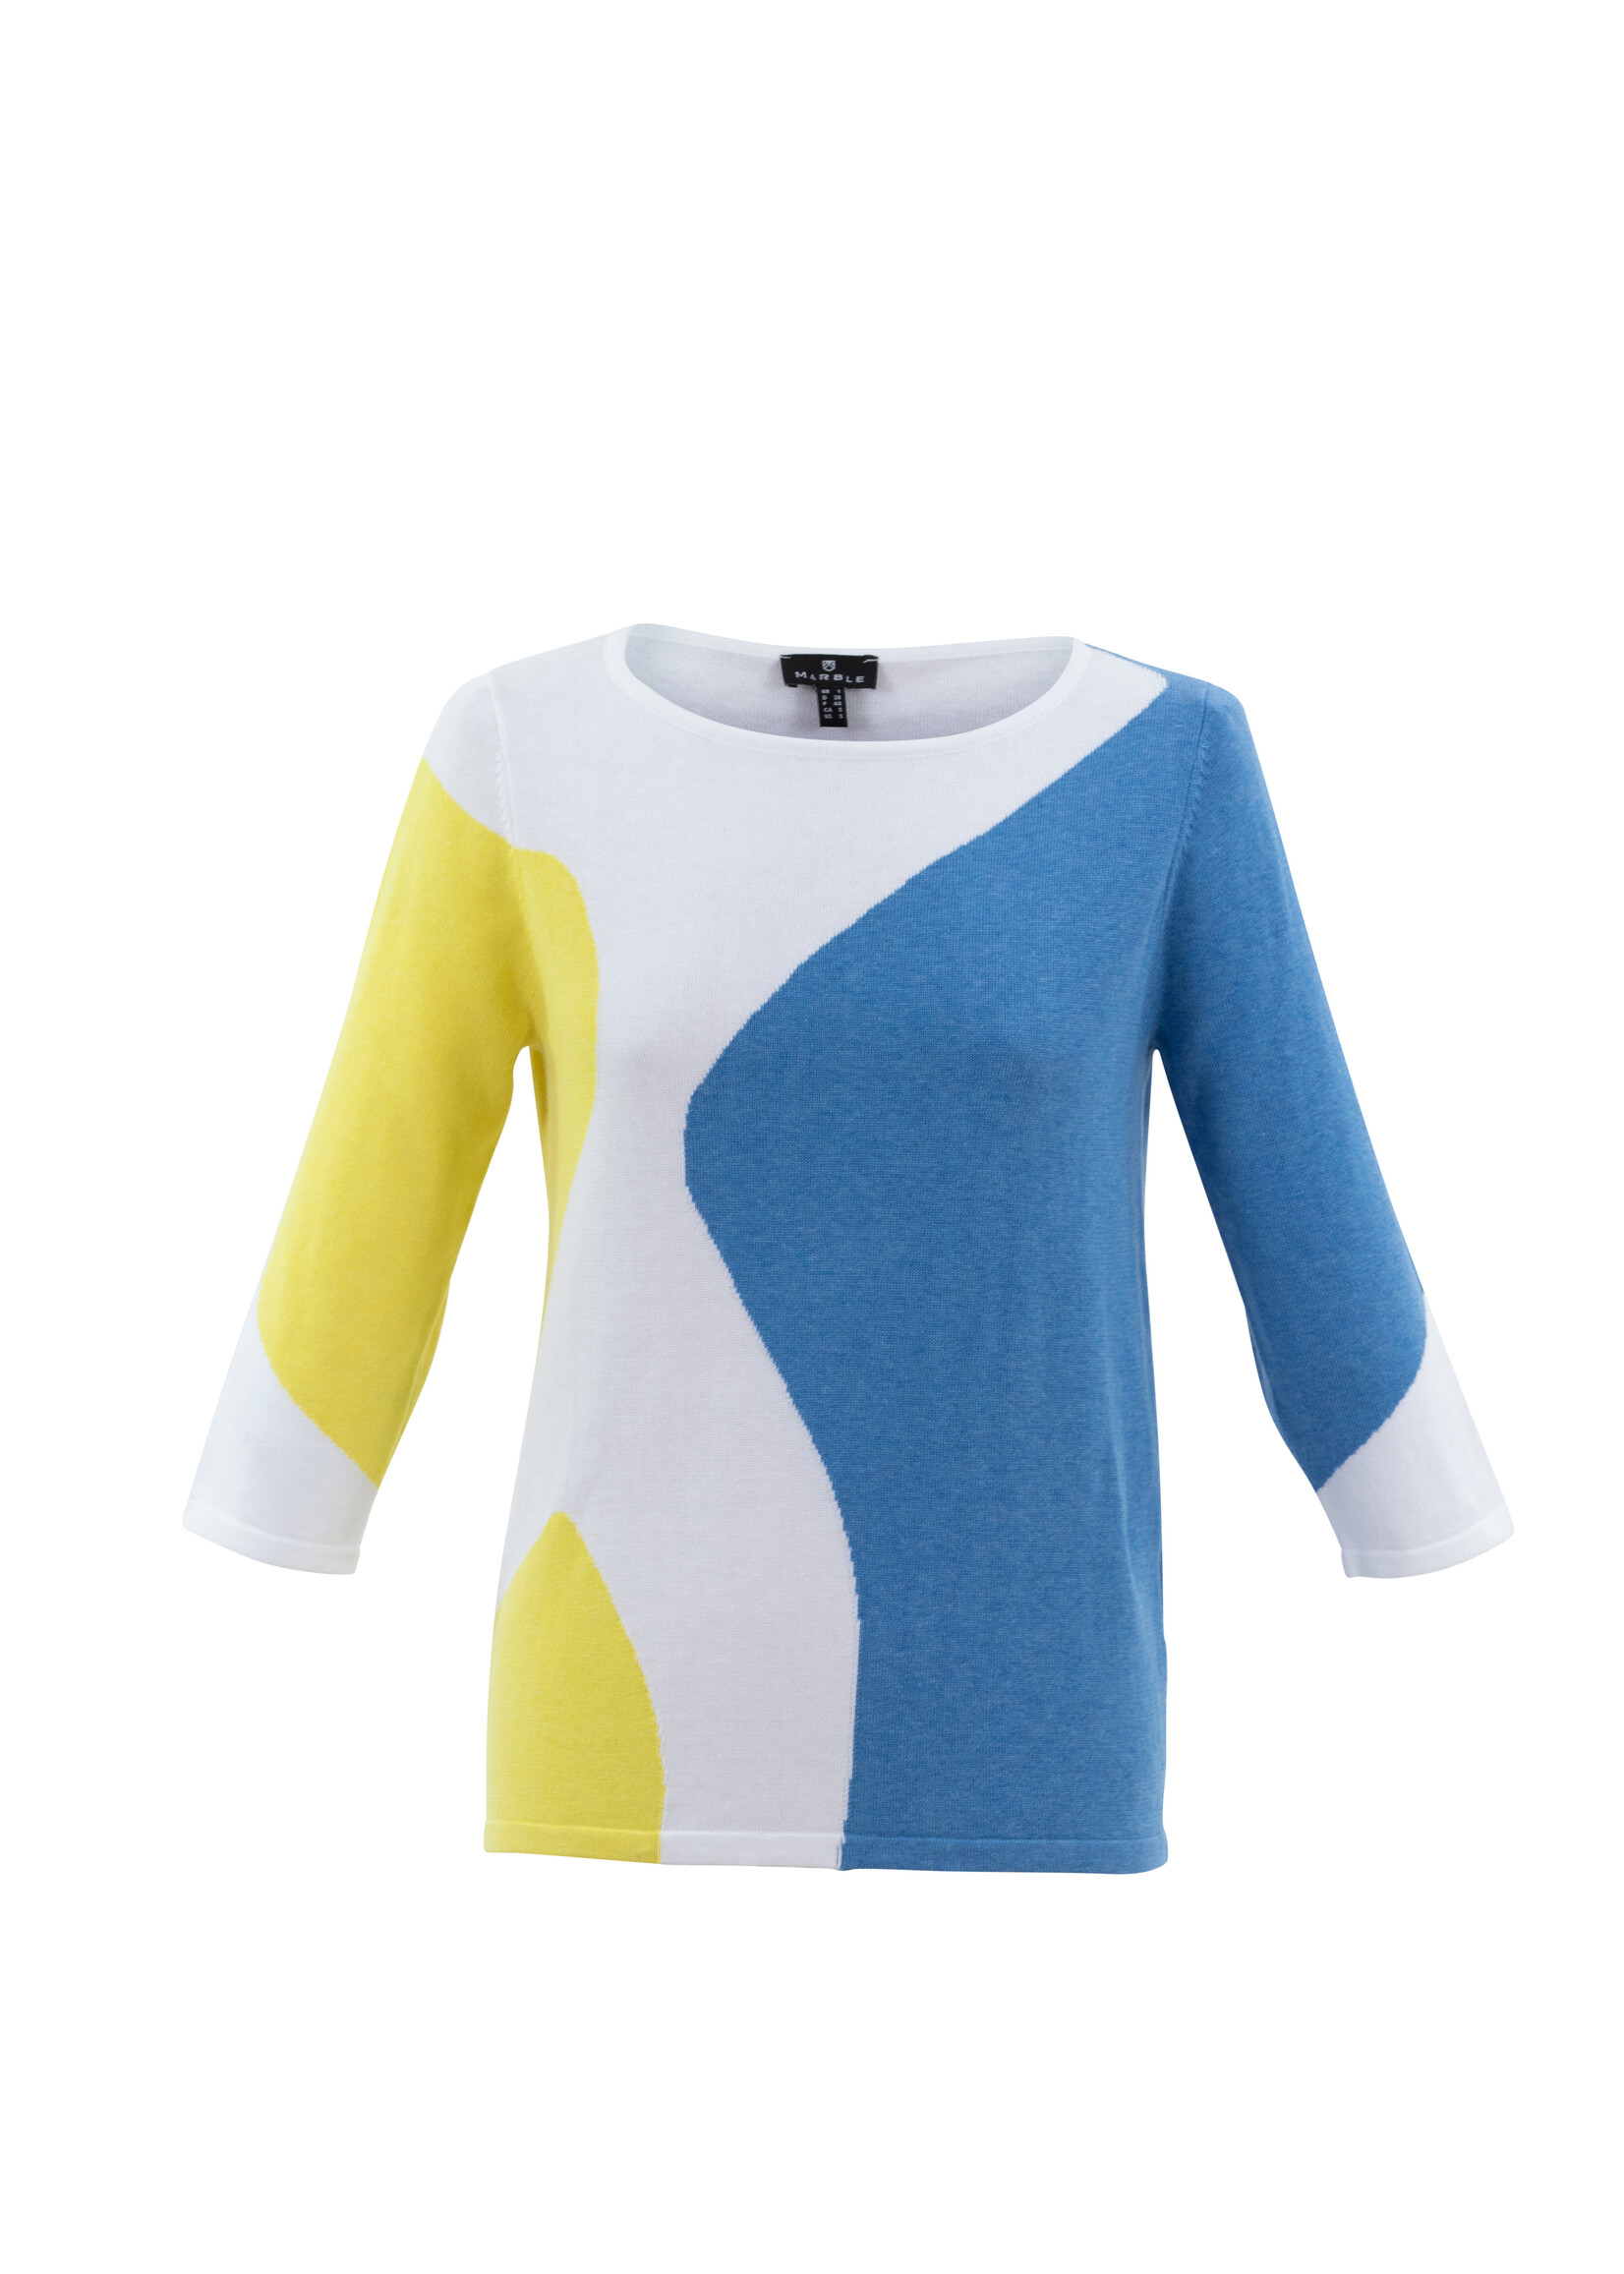 Marble Fashion Designs Marble Swirled Colour Sweater